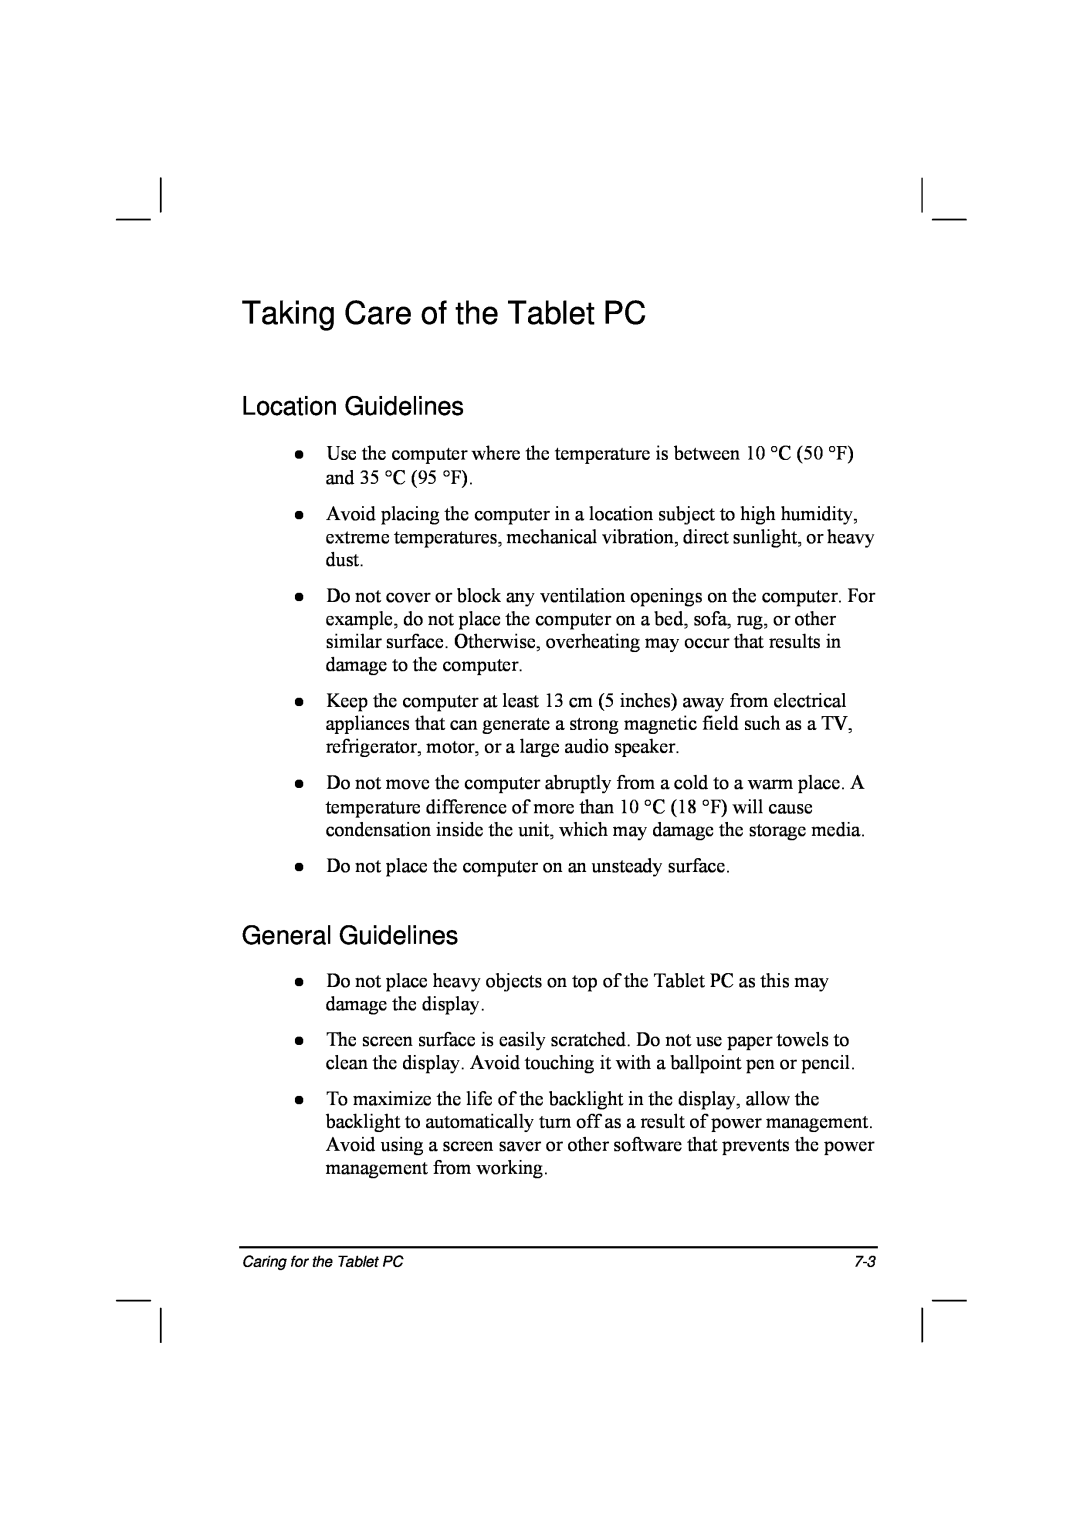 TAG 20 Series manual Taking Care of the Tablet PC, Location Guidelines, General Guidelines 